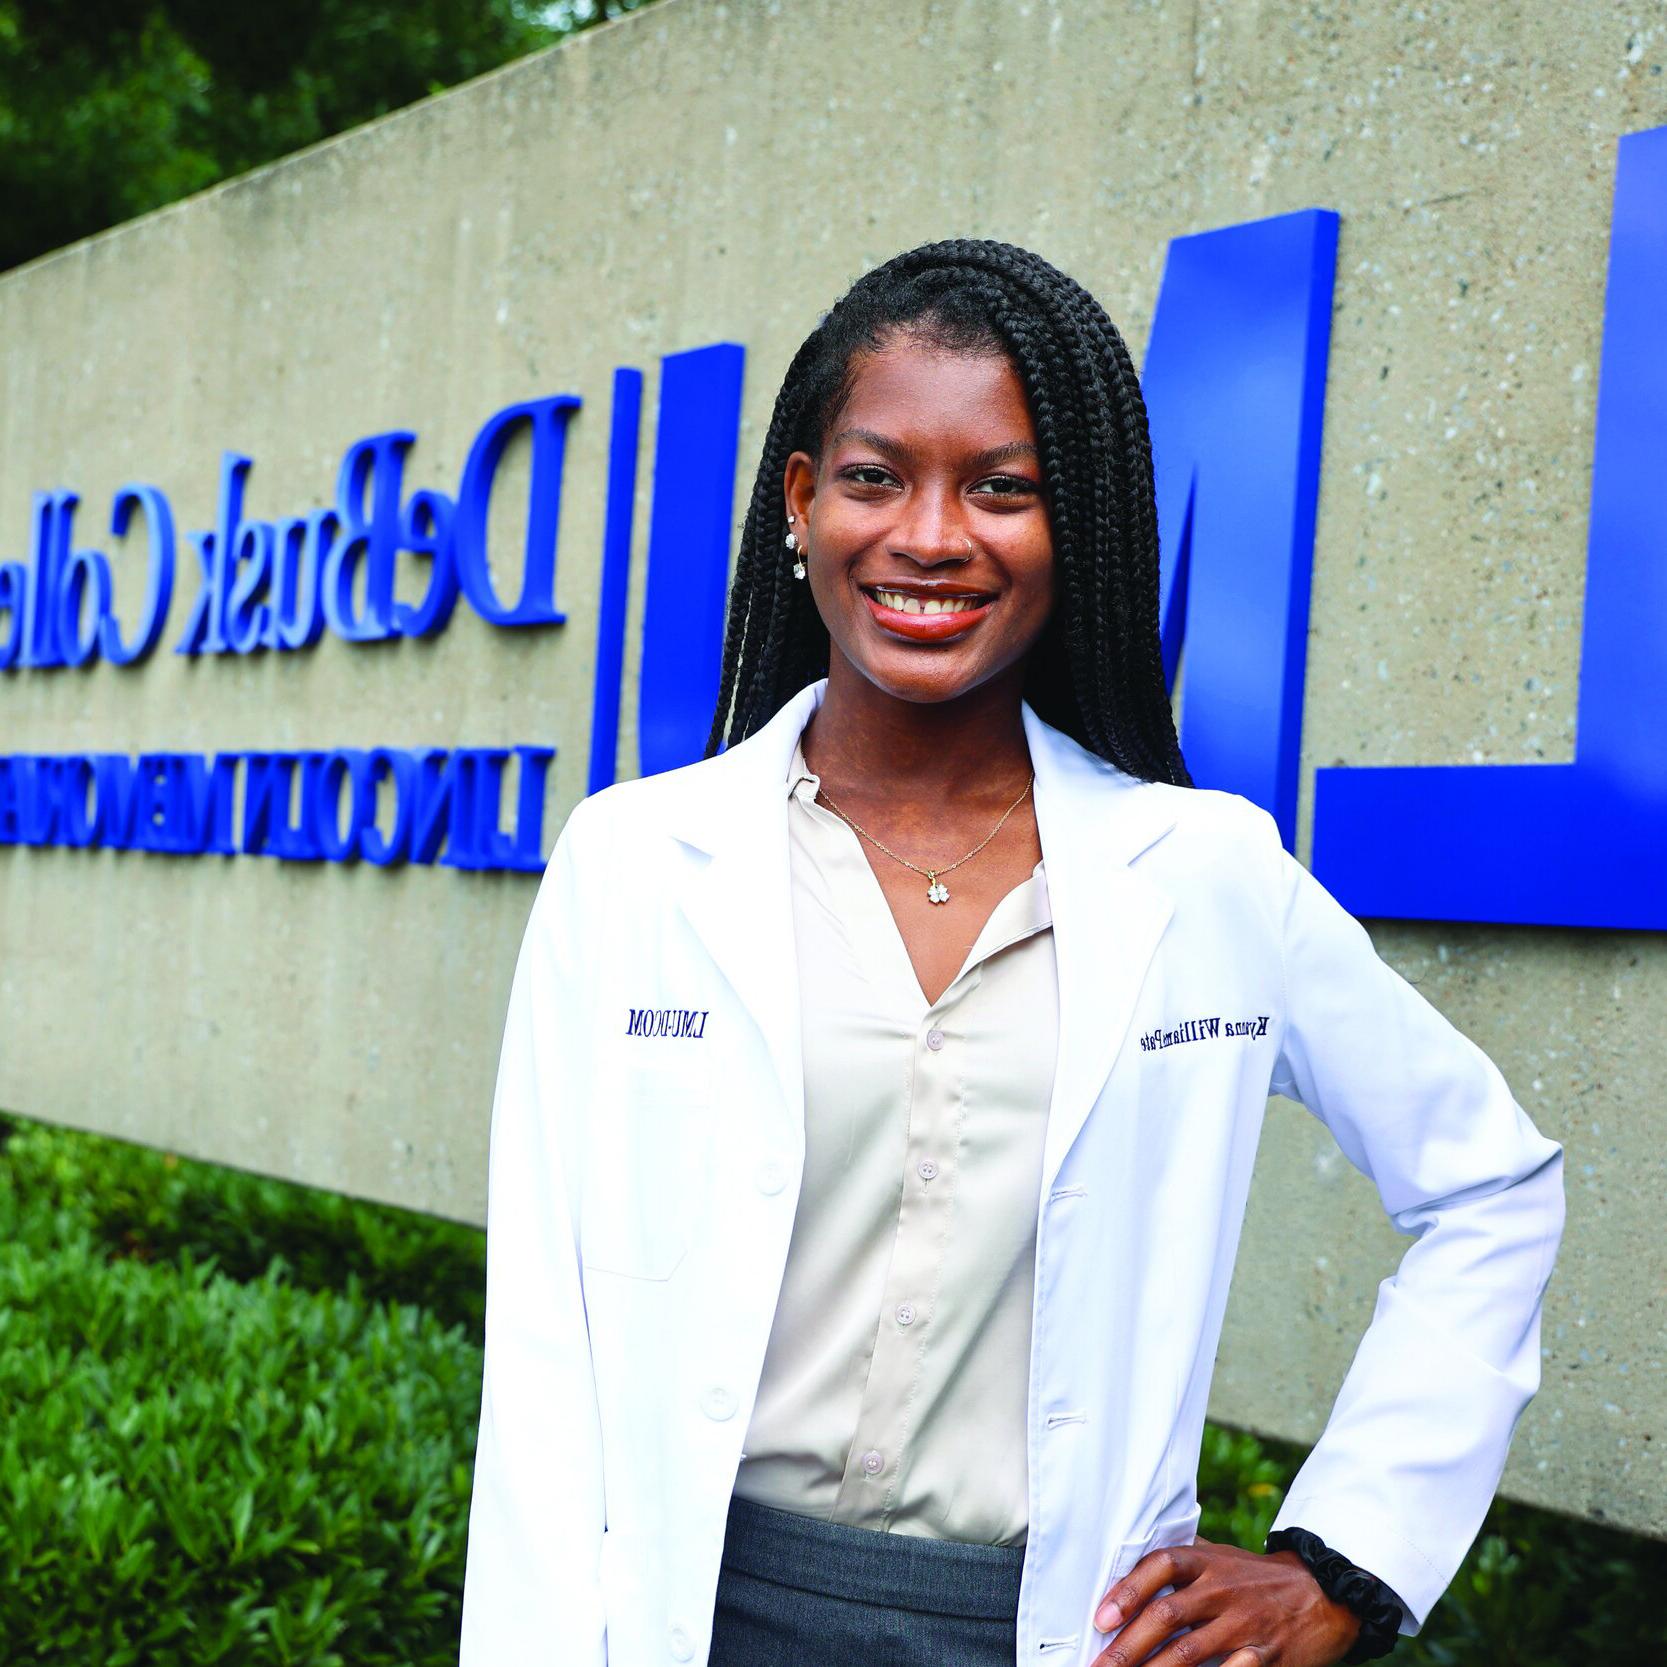 Providing the Key to Public Health: Alumnus Kyanna Williams-Pate brings advocacy to the forefront of healthcare